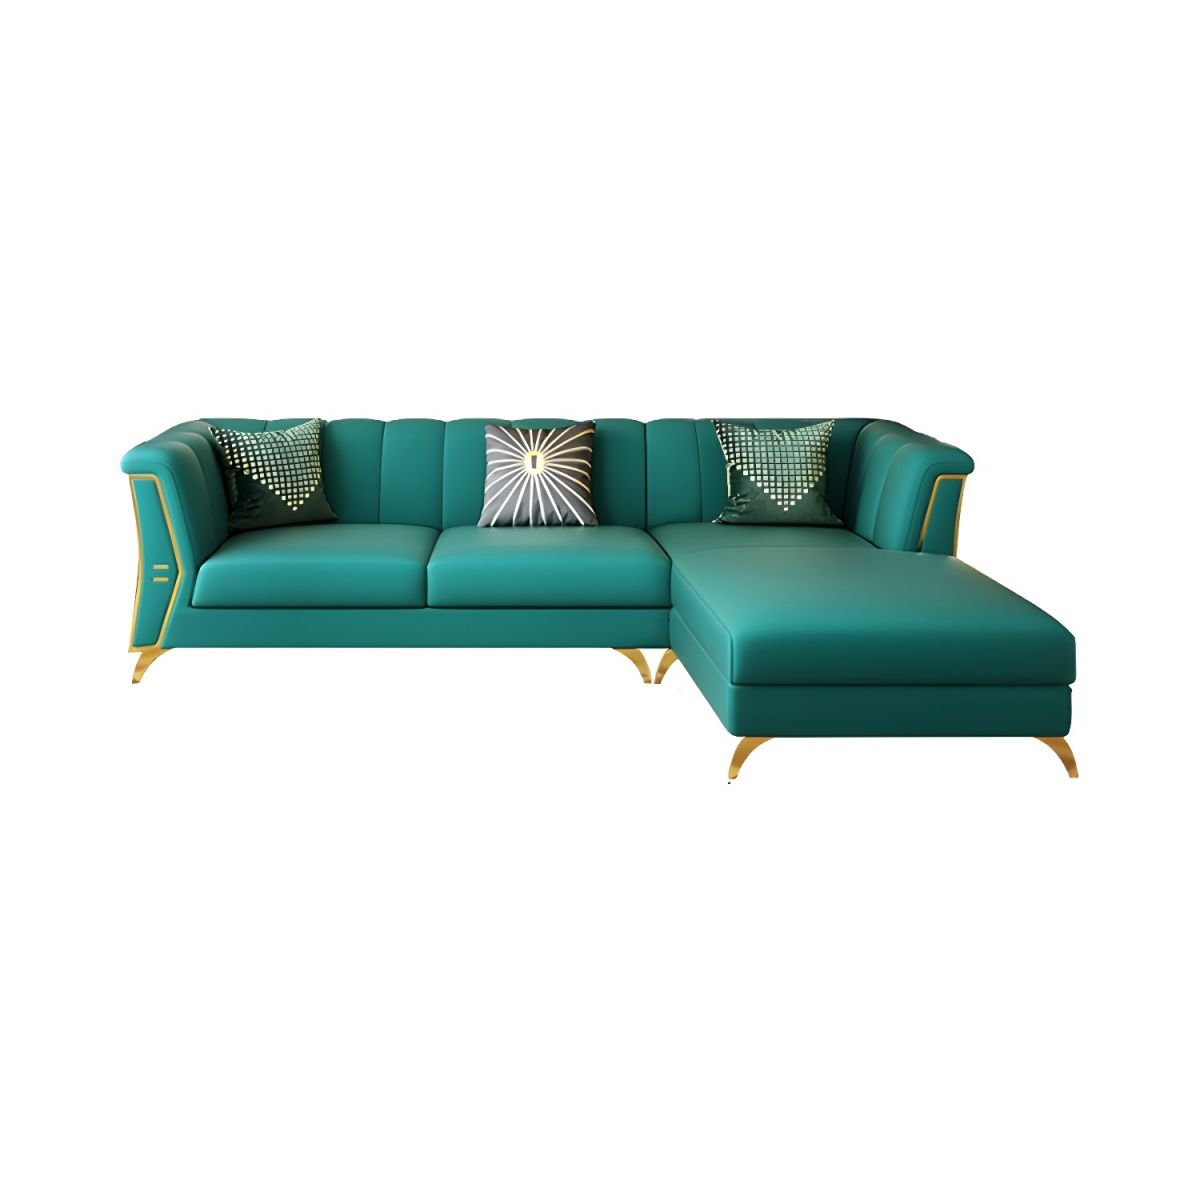 Glam Style Nappa Sectional Sofa with Brass Legs and Channel Back Design - 105.5"L x 71"W x 31"H Nappa Right